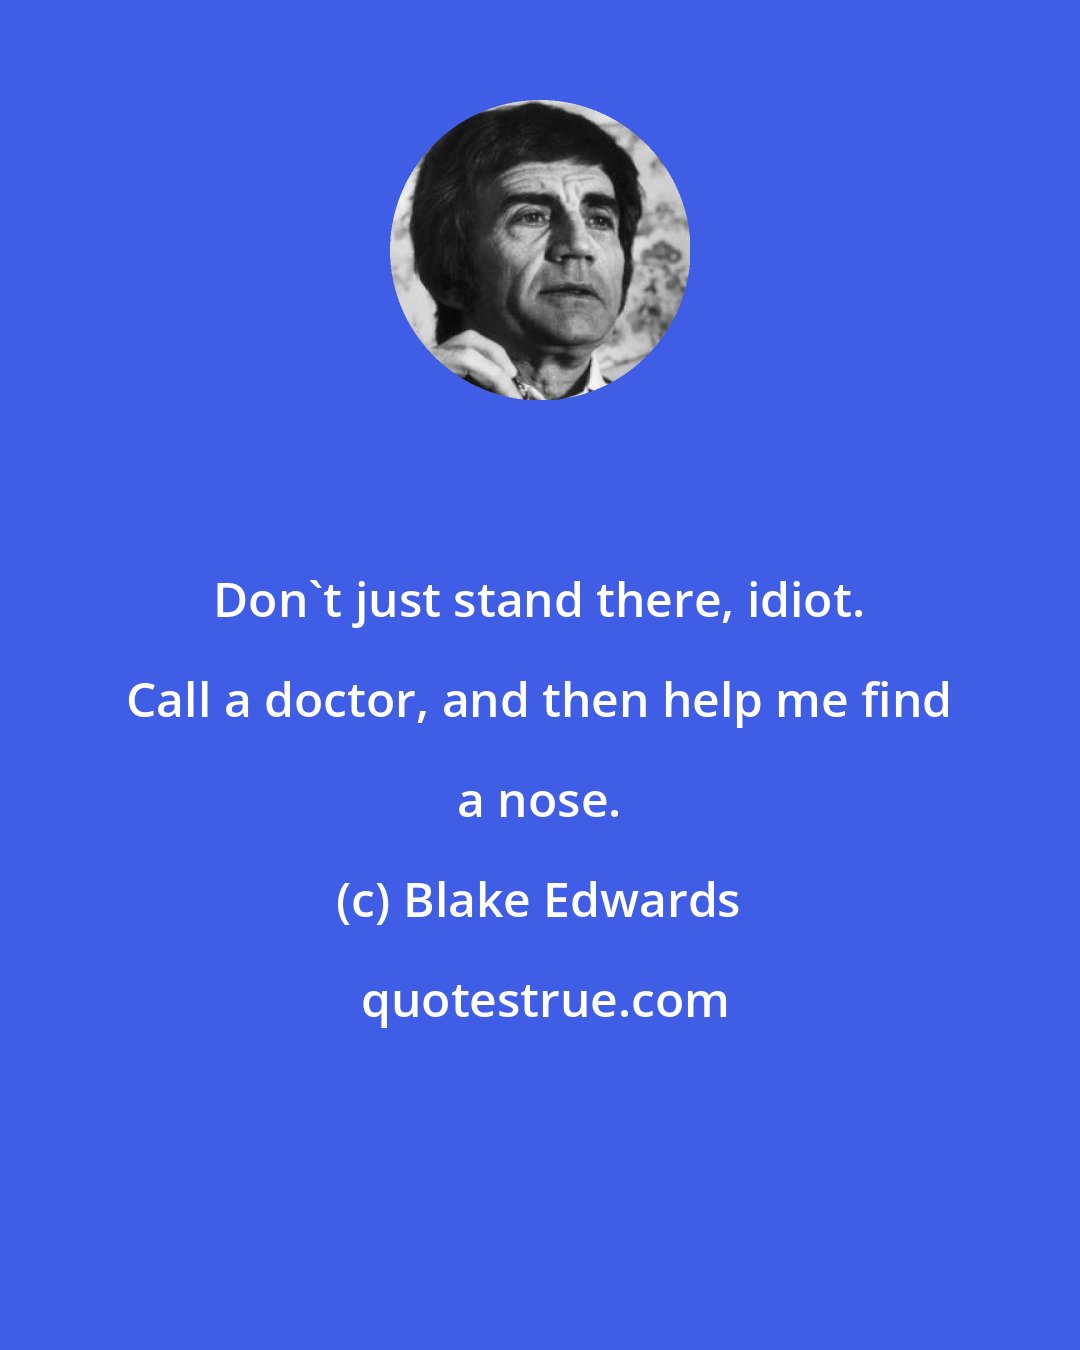 Blake Edwards: Don't just stand there, idiot. Call a doctor, and then help me find a nose.